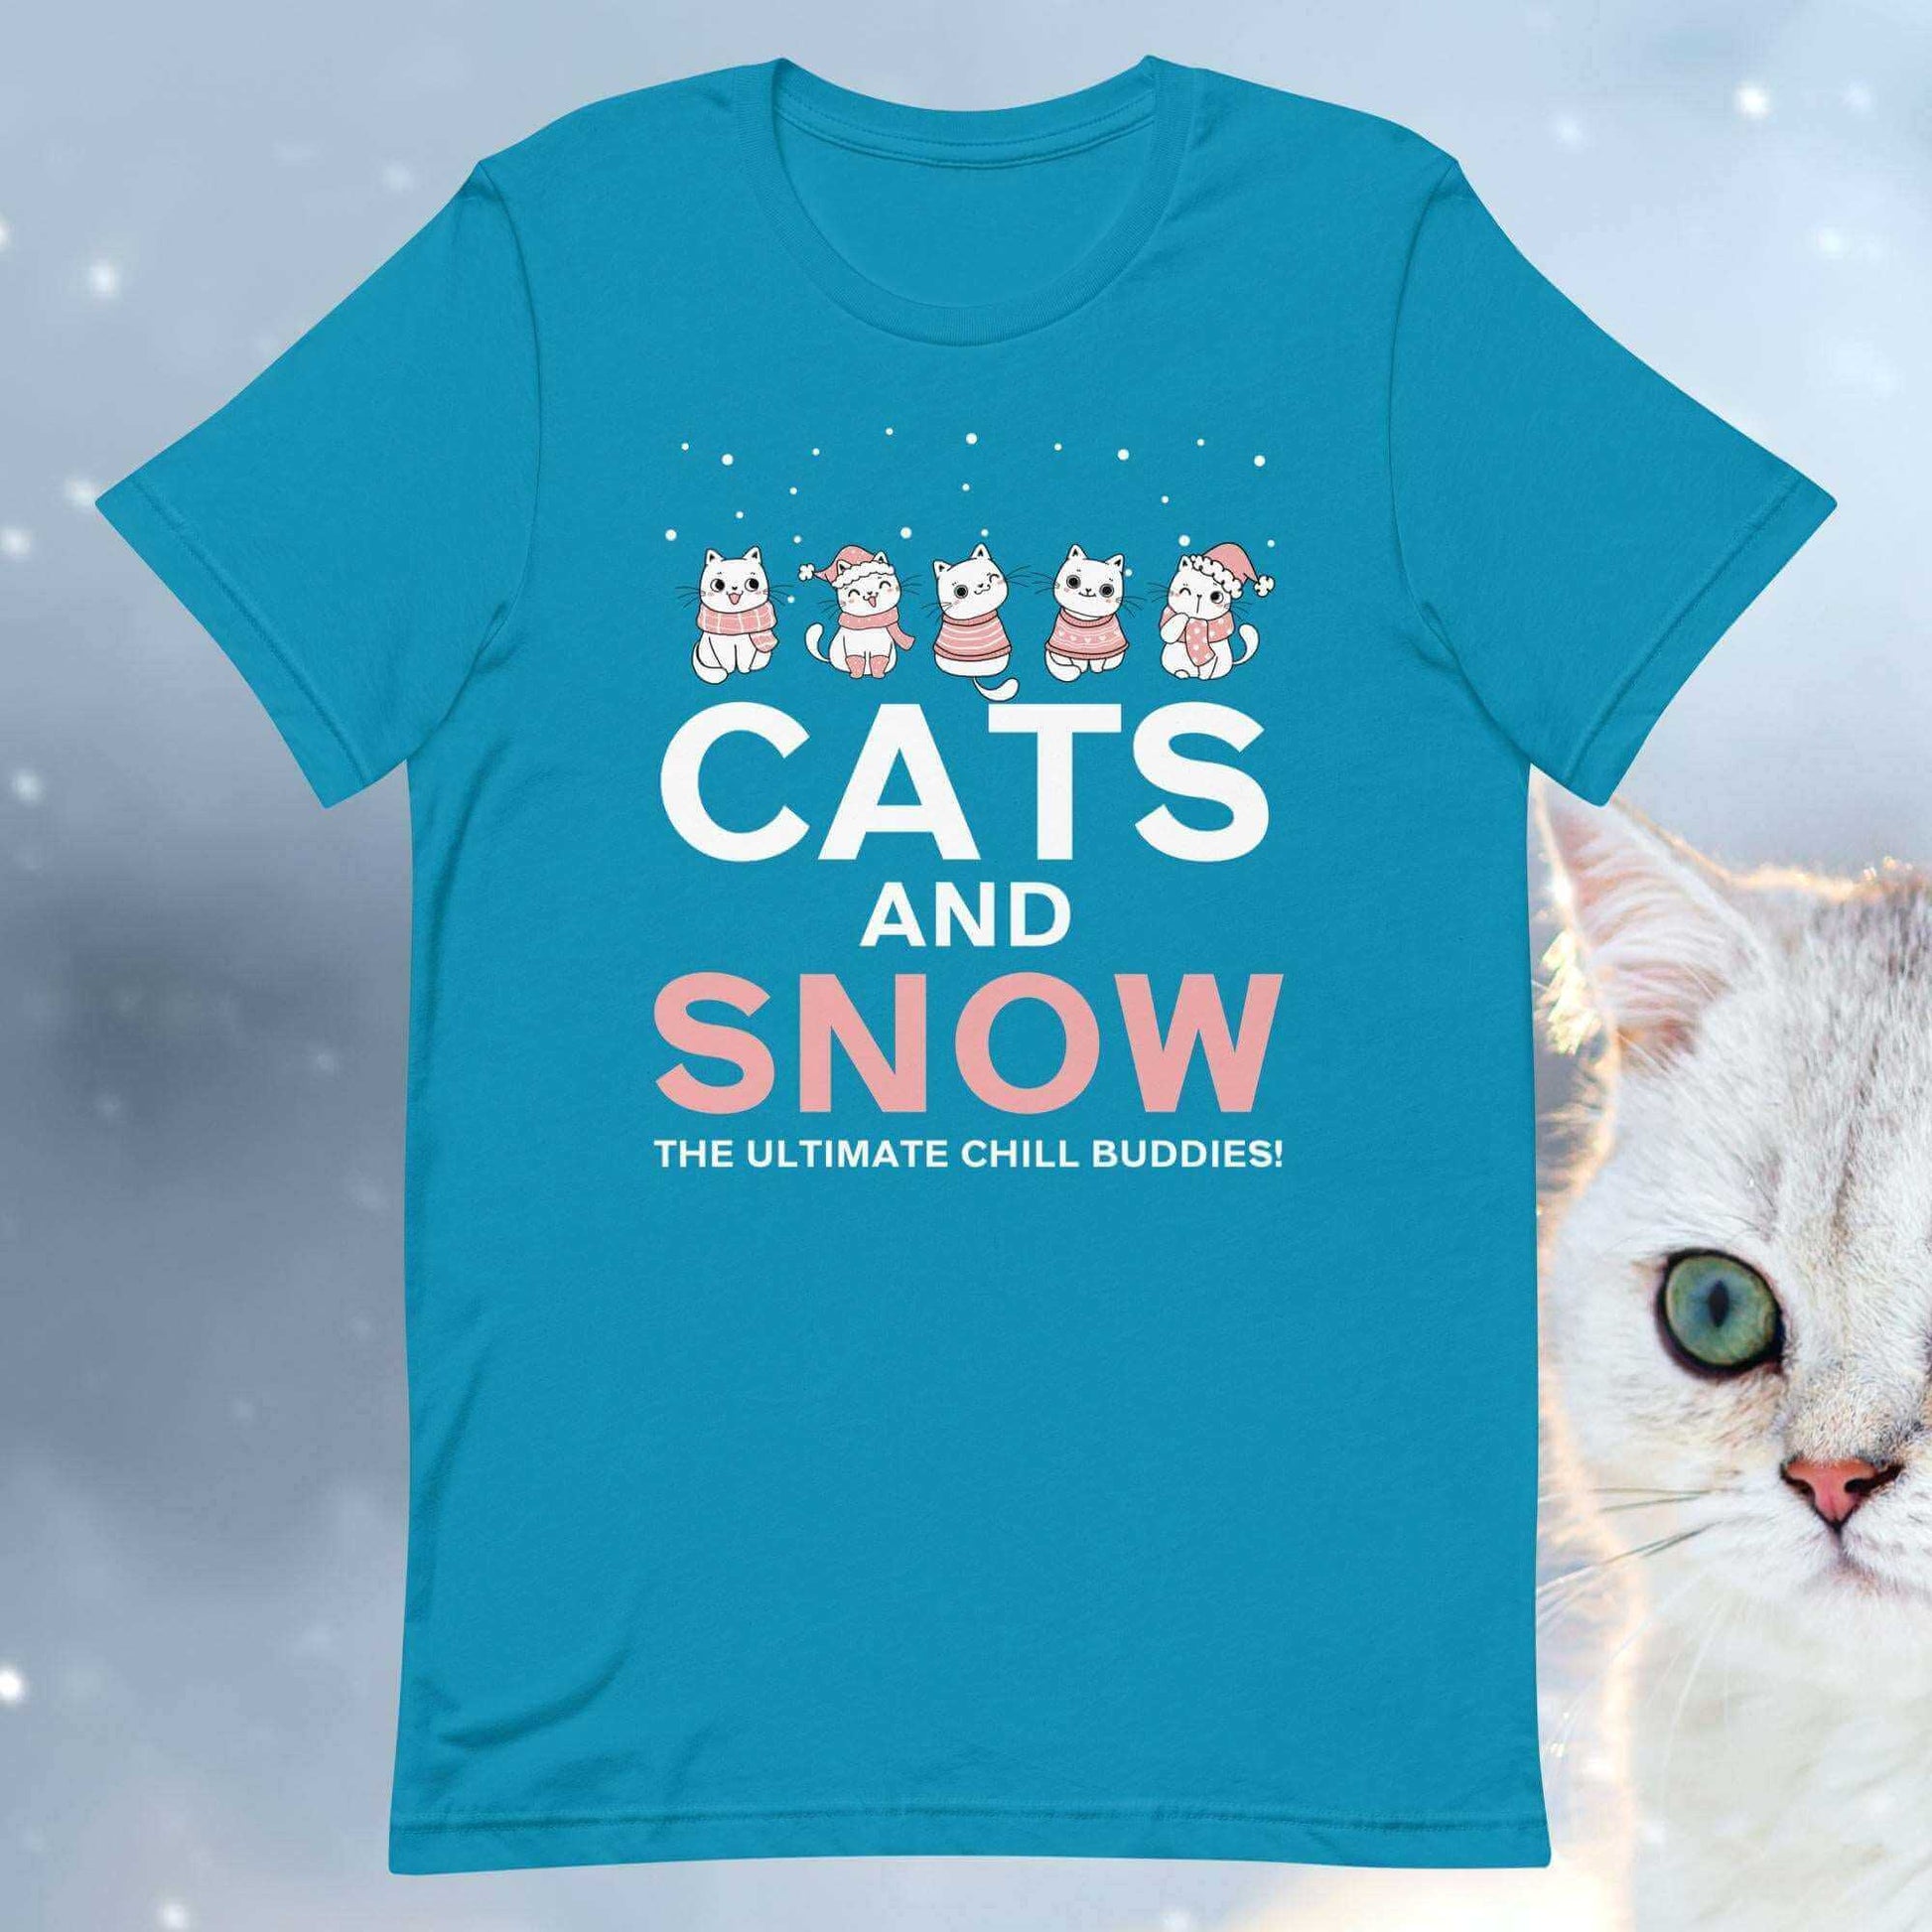 Cats and Snow: The Ultimate Chill Buddies! Unisex t-shirt